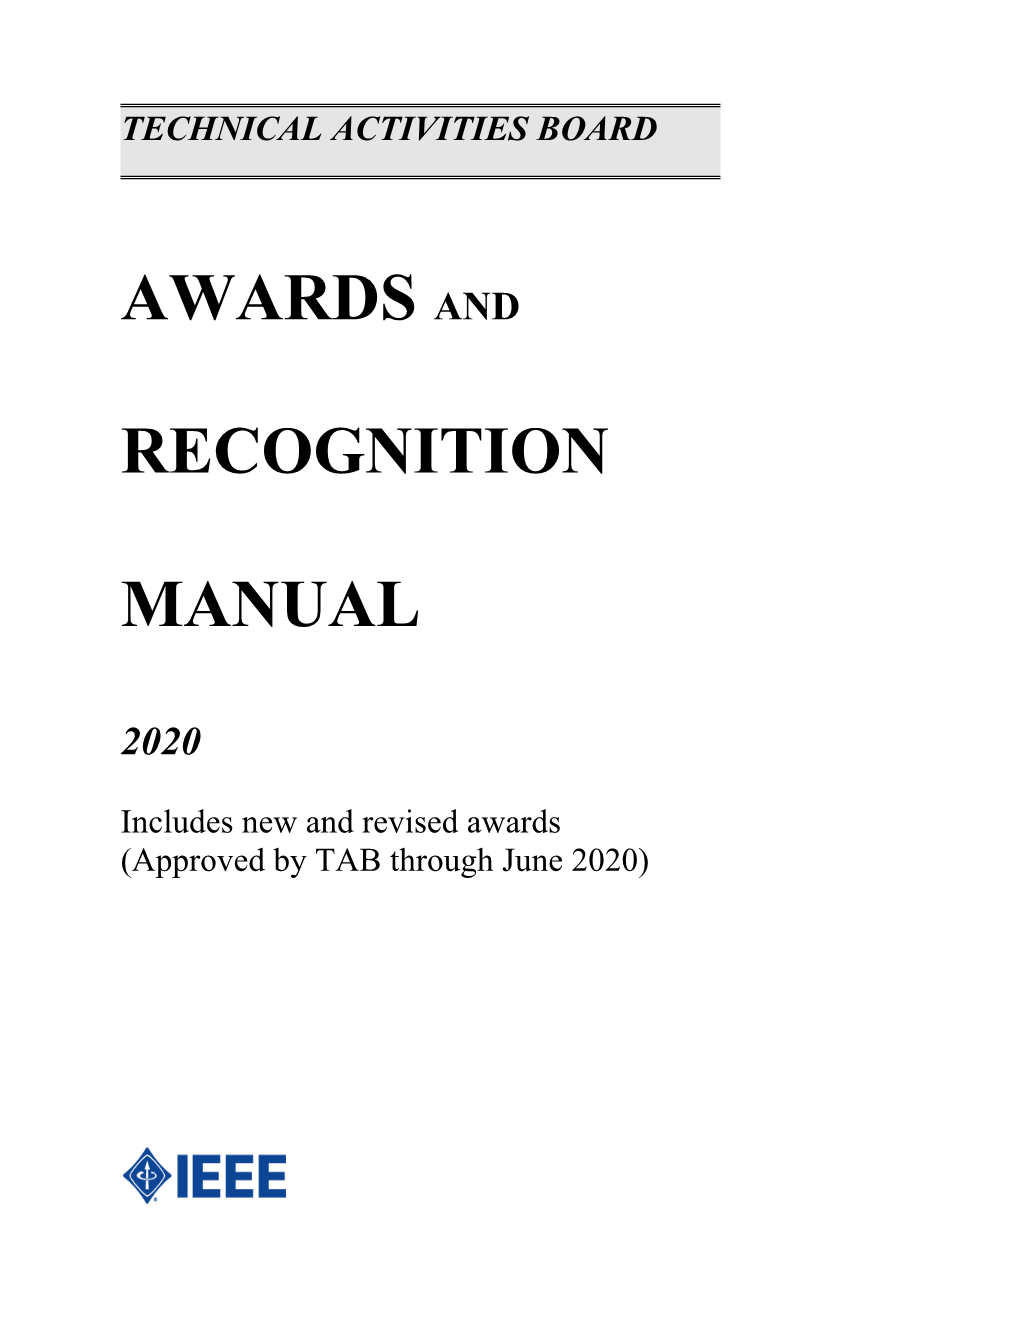 TAB Awards and Recognition Manual,Microsoft Word